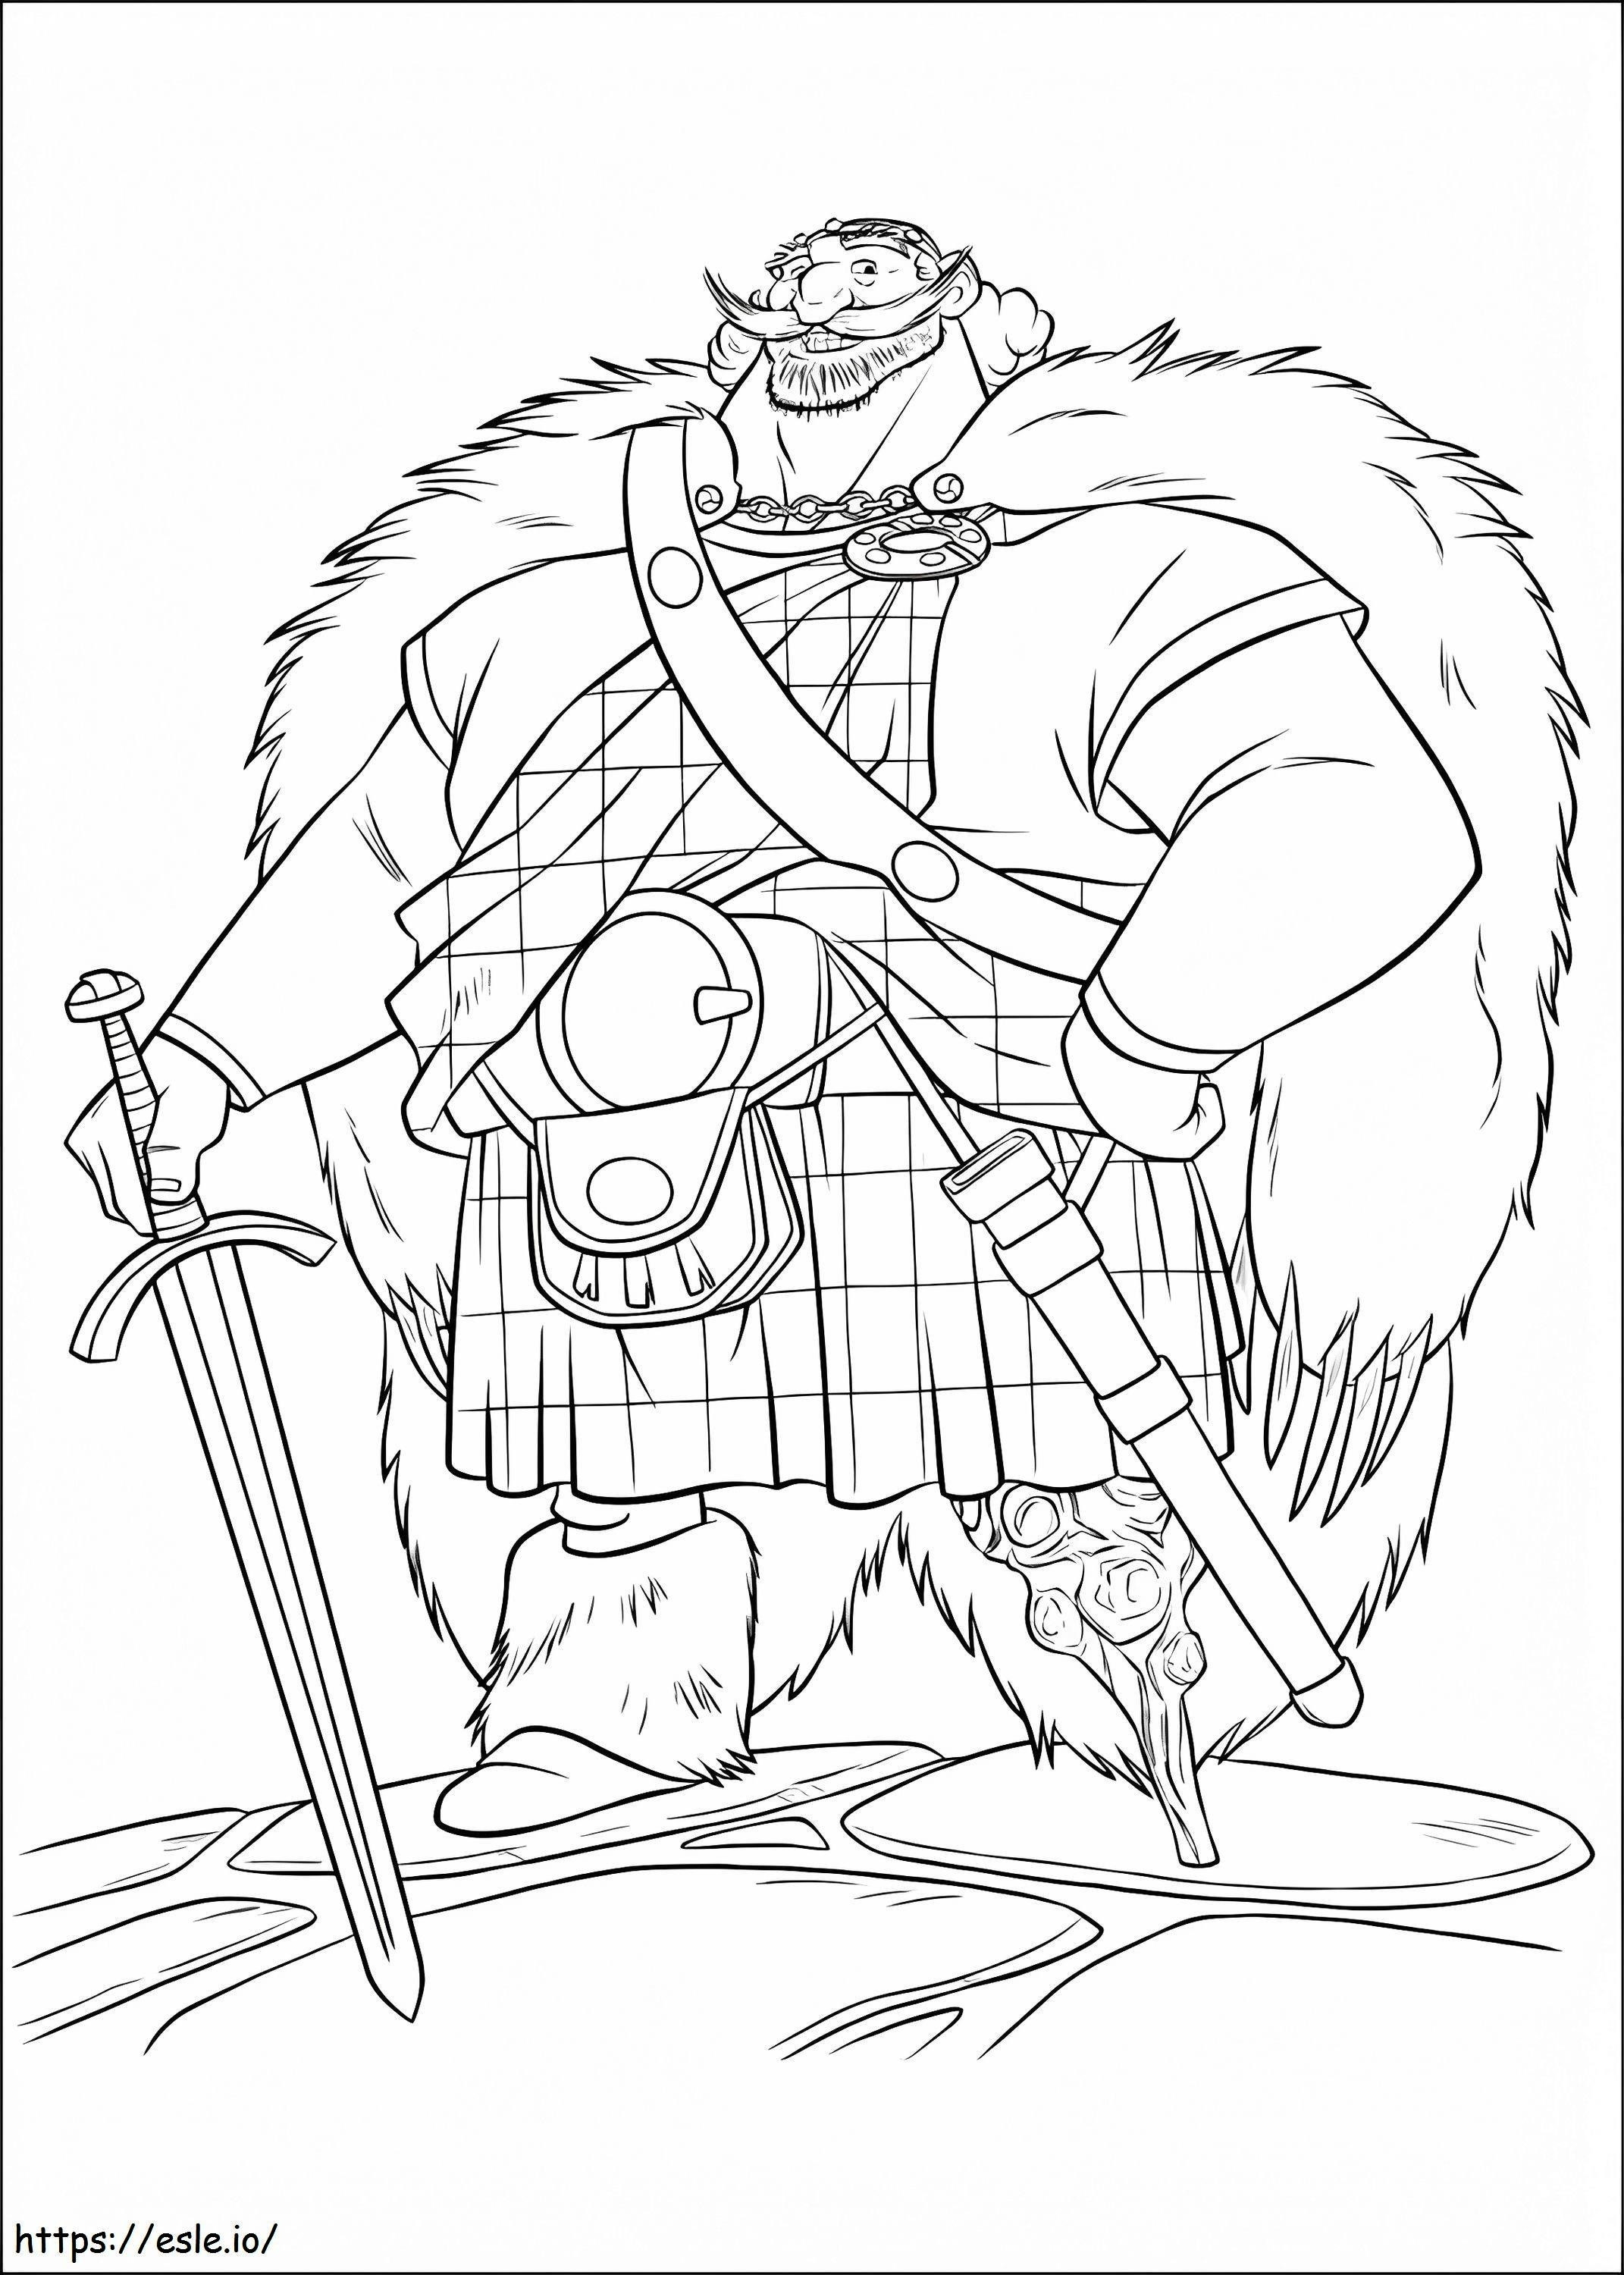 1534216955 Happy King Fergus A4 coloring page